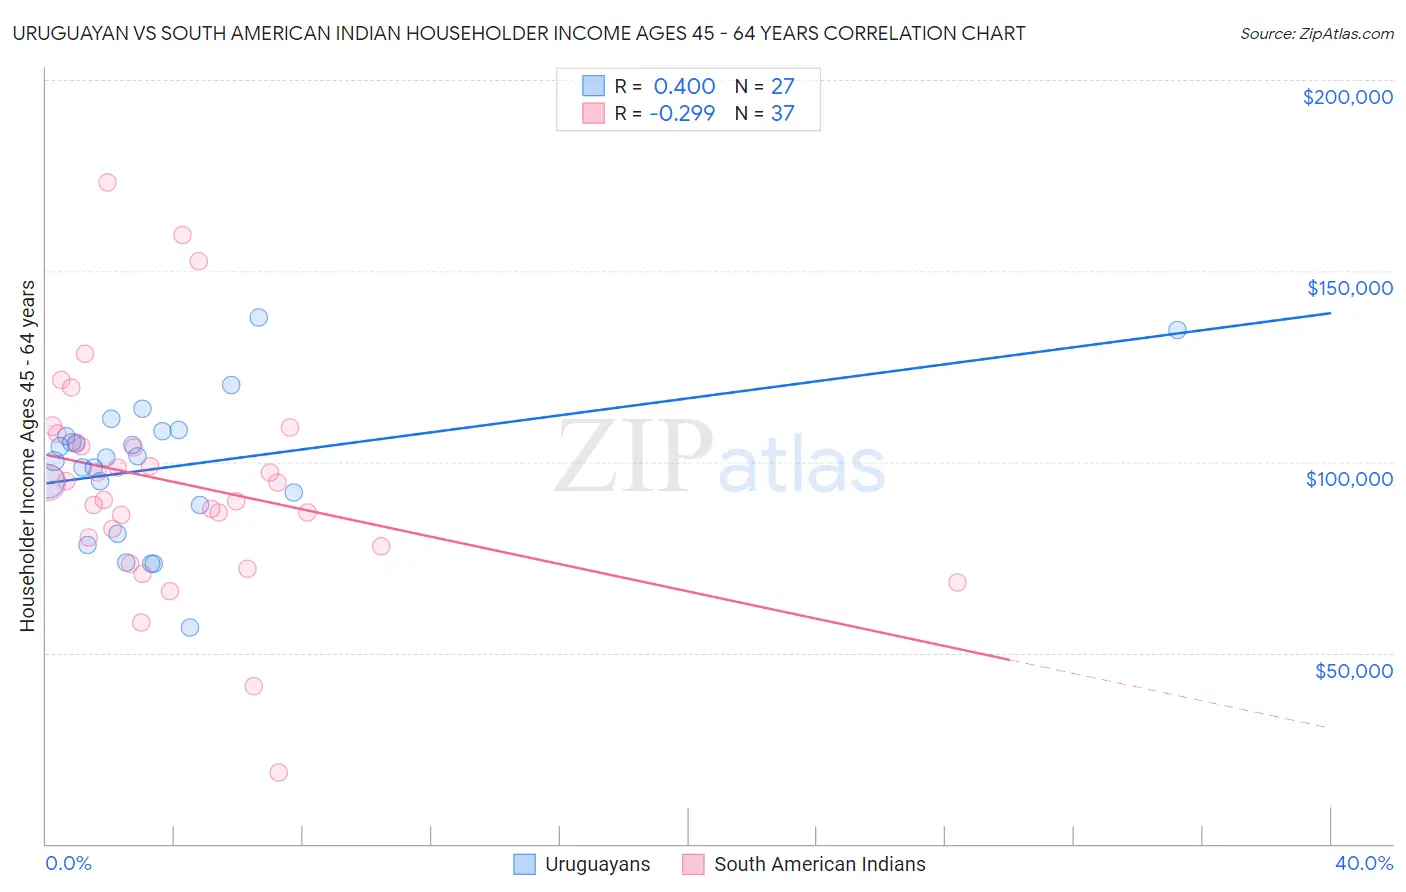 Uruguayan vs South American Indian Householder Income Ages 45 - 64 years